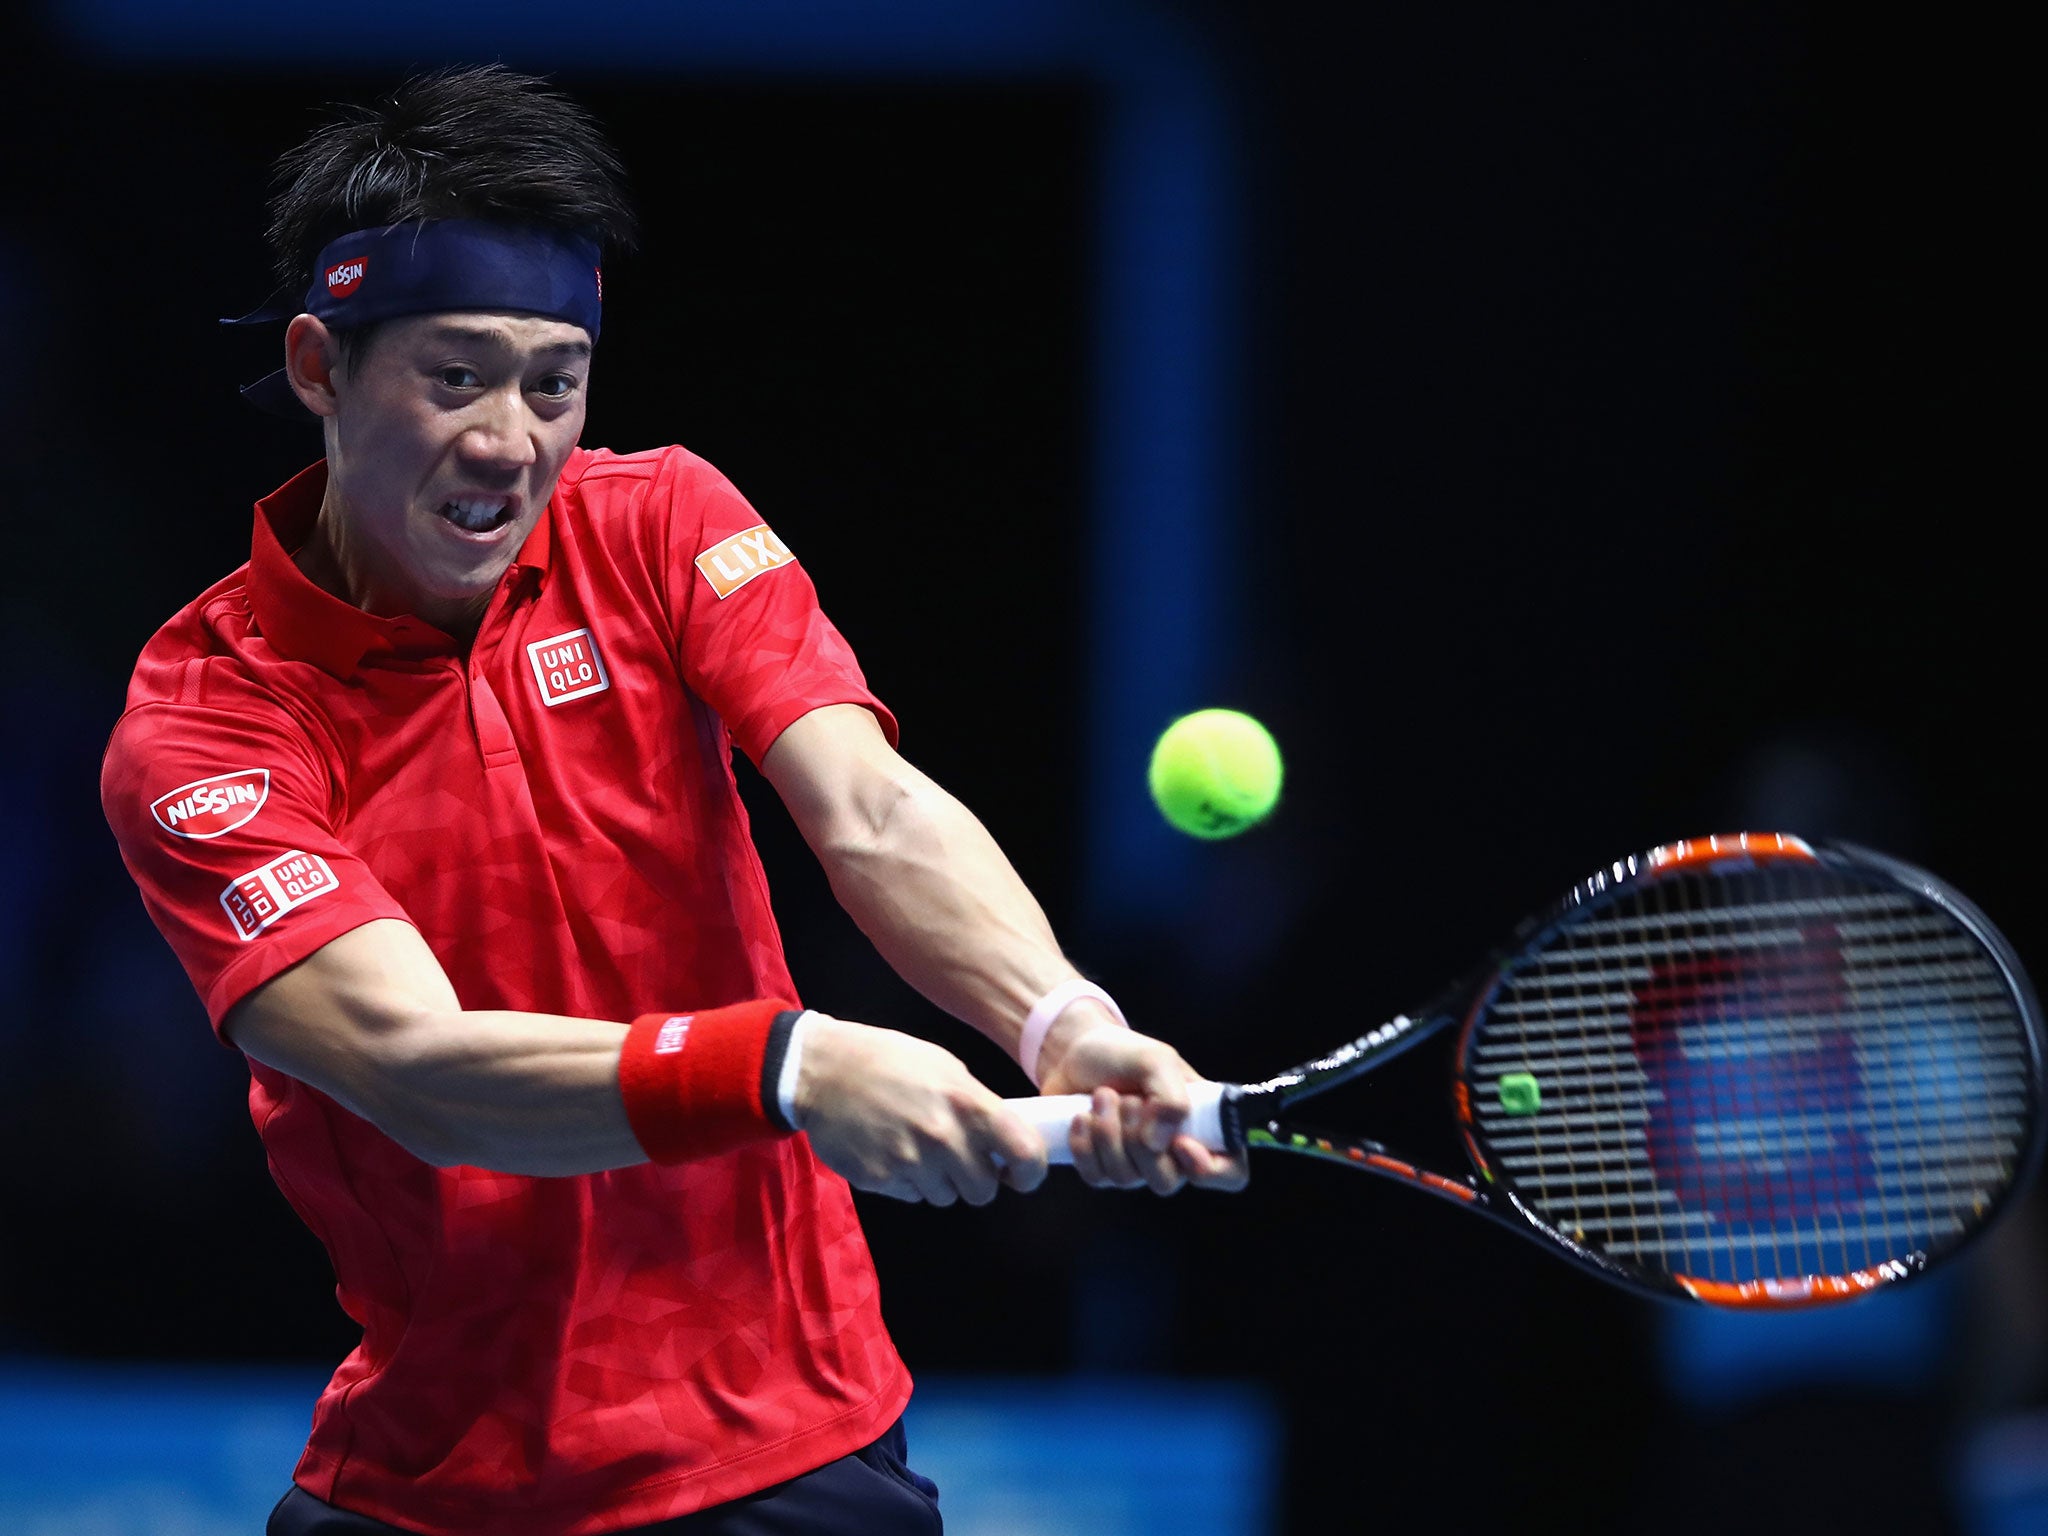 Nishikori takes on Murray in his second group match